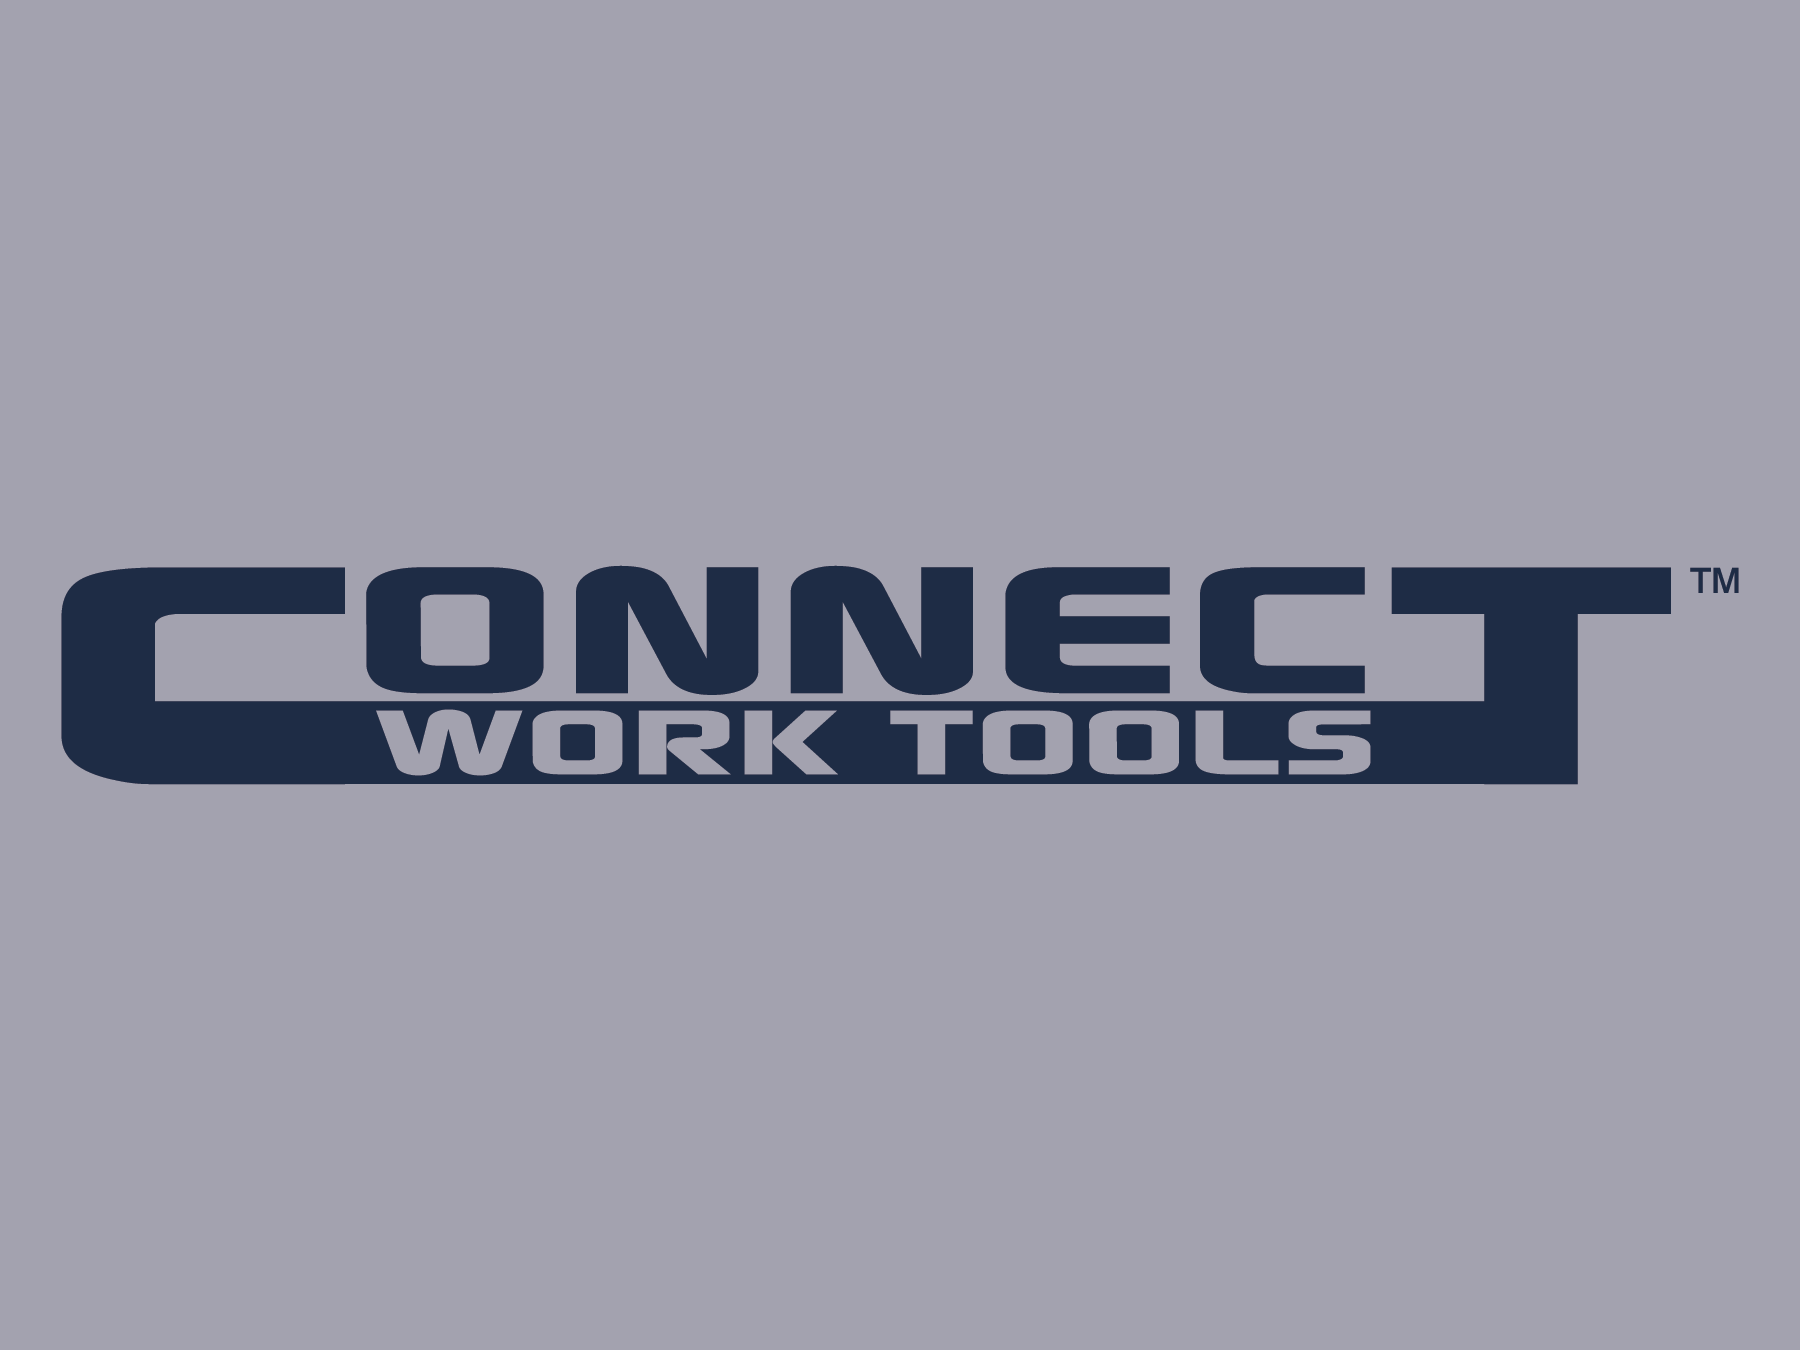 CONNECT WORK TOOLS